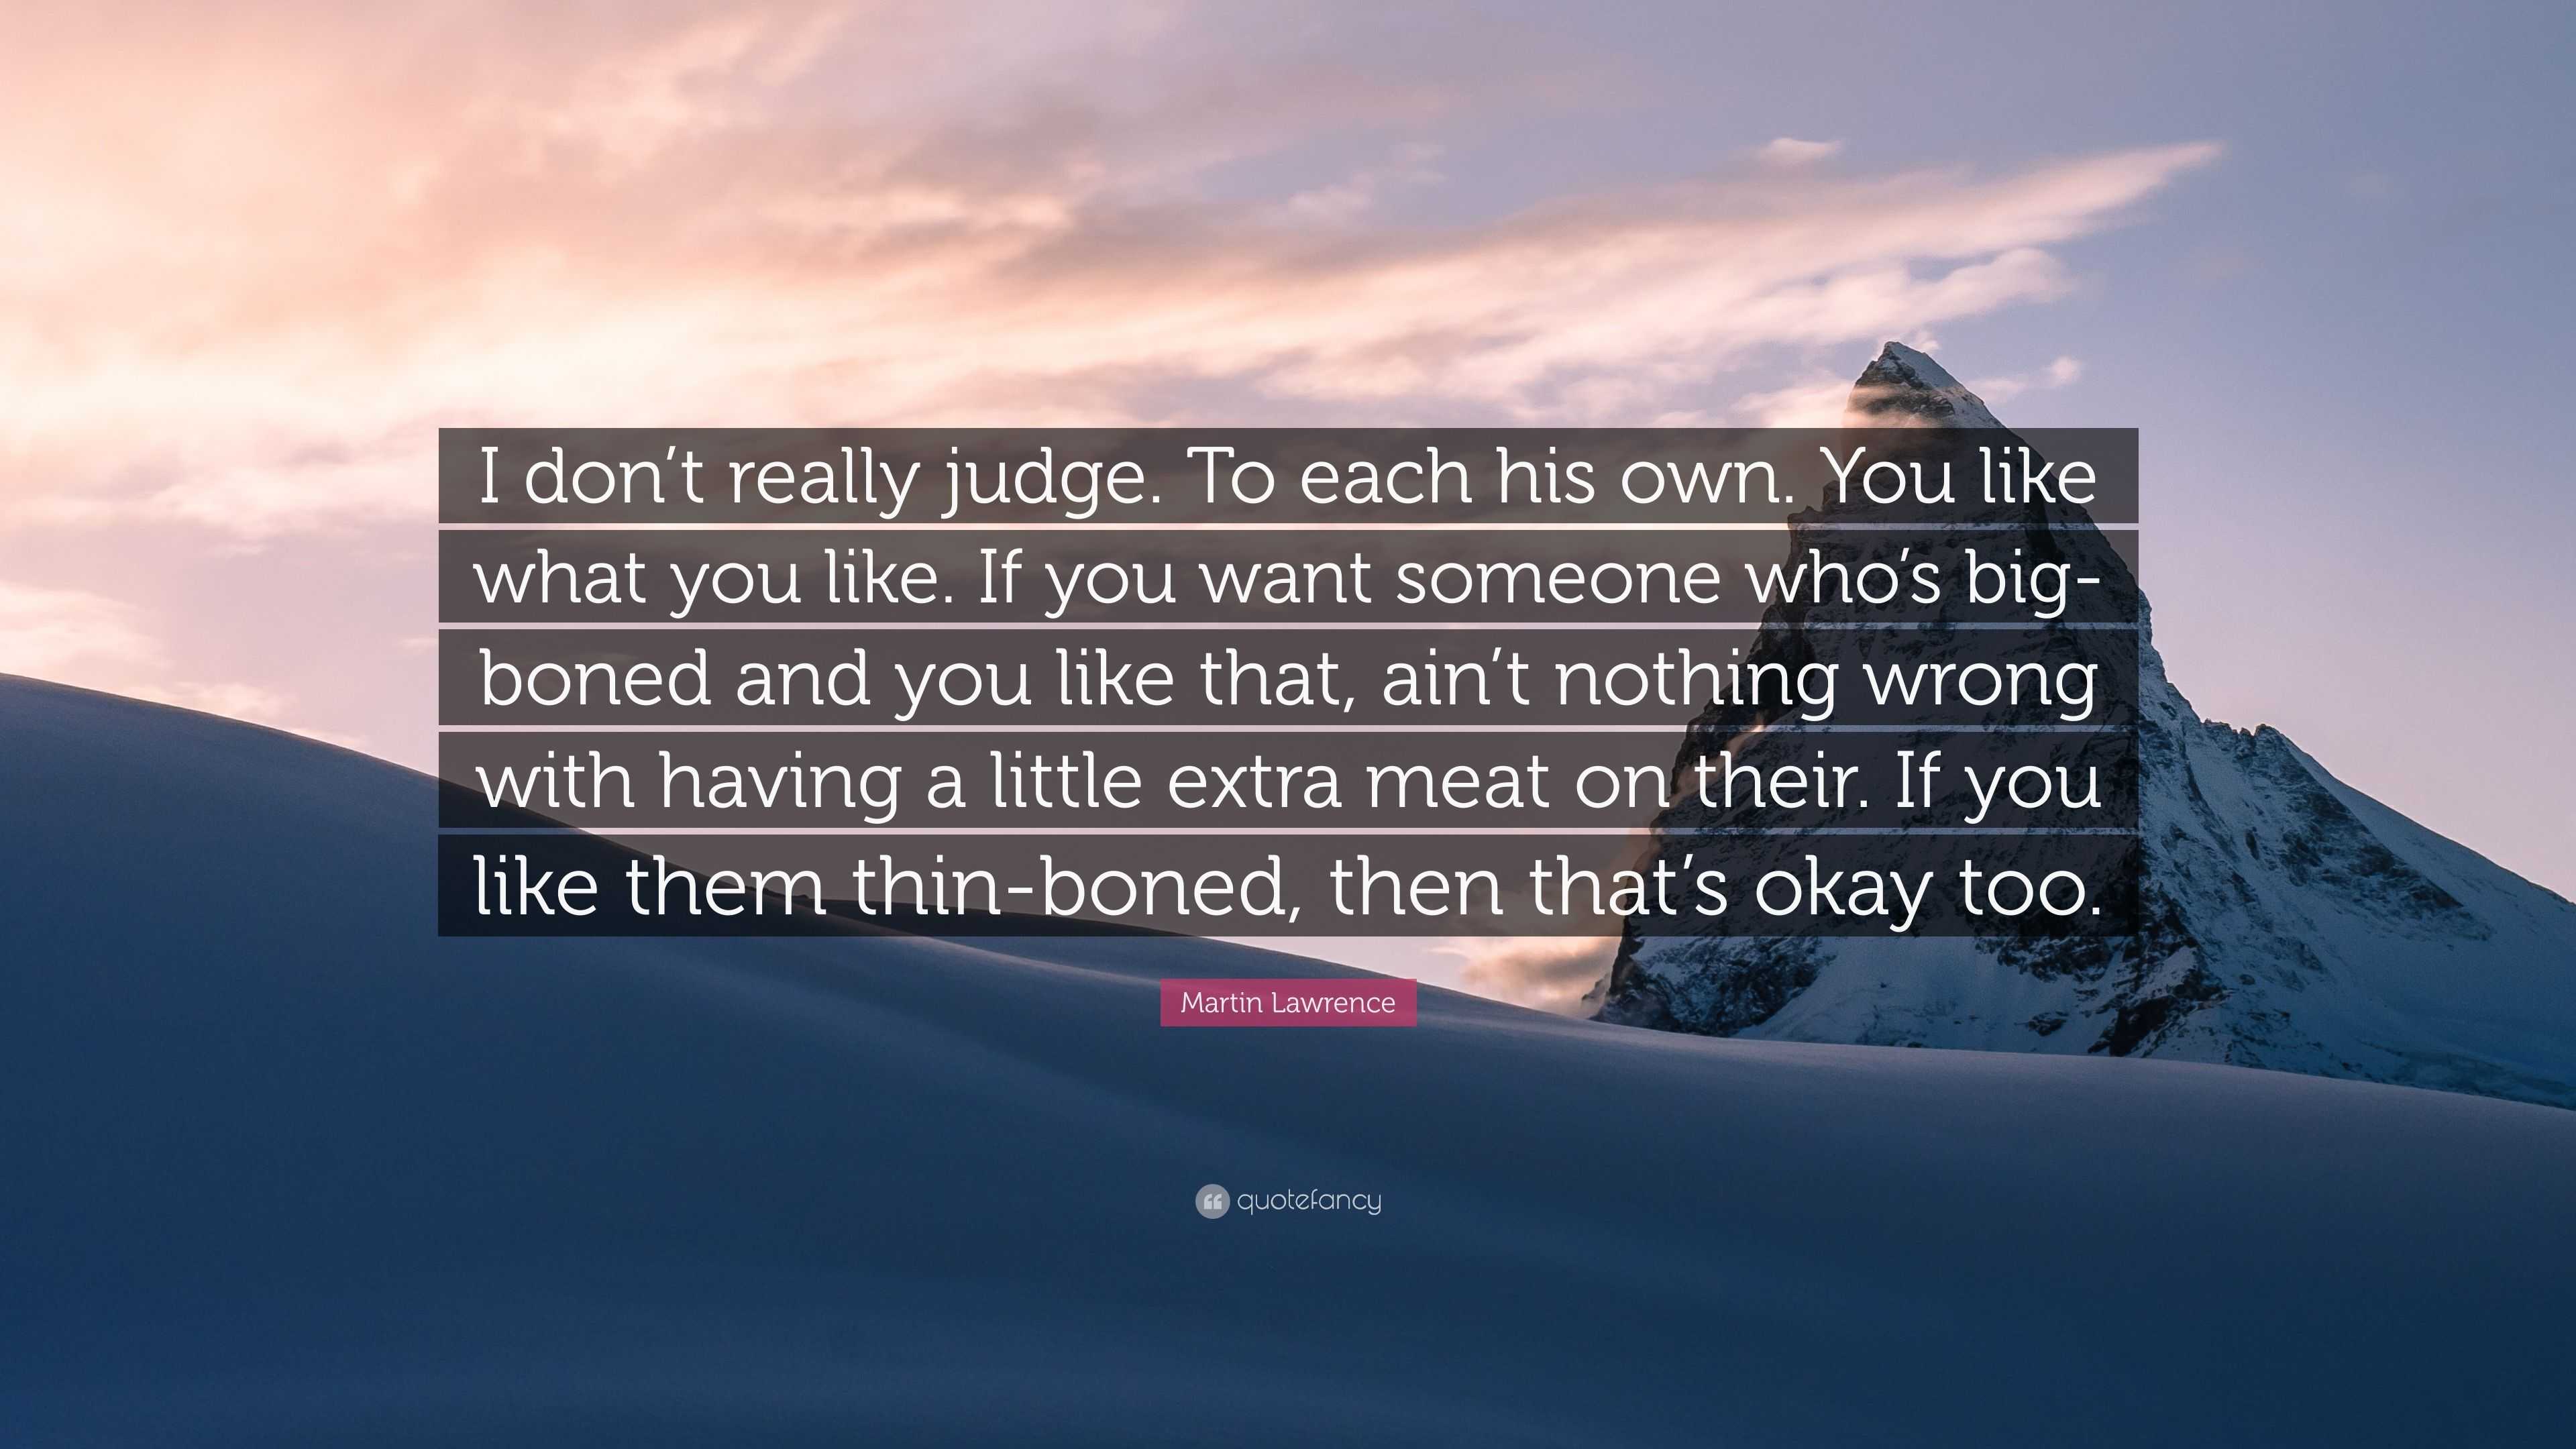 https://quotefancy.com/media/wallpaper/3840x2160/3386101-Martin-Lawrence-Quote-I-don-t-really-judge-To-each-his-own-You.jpg